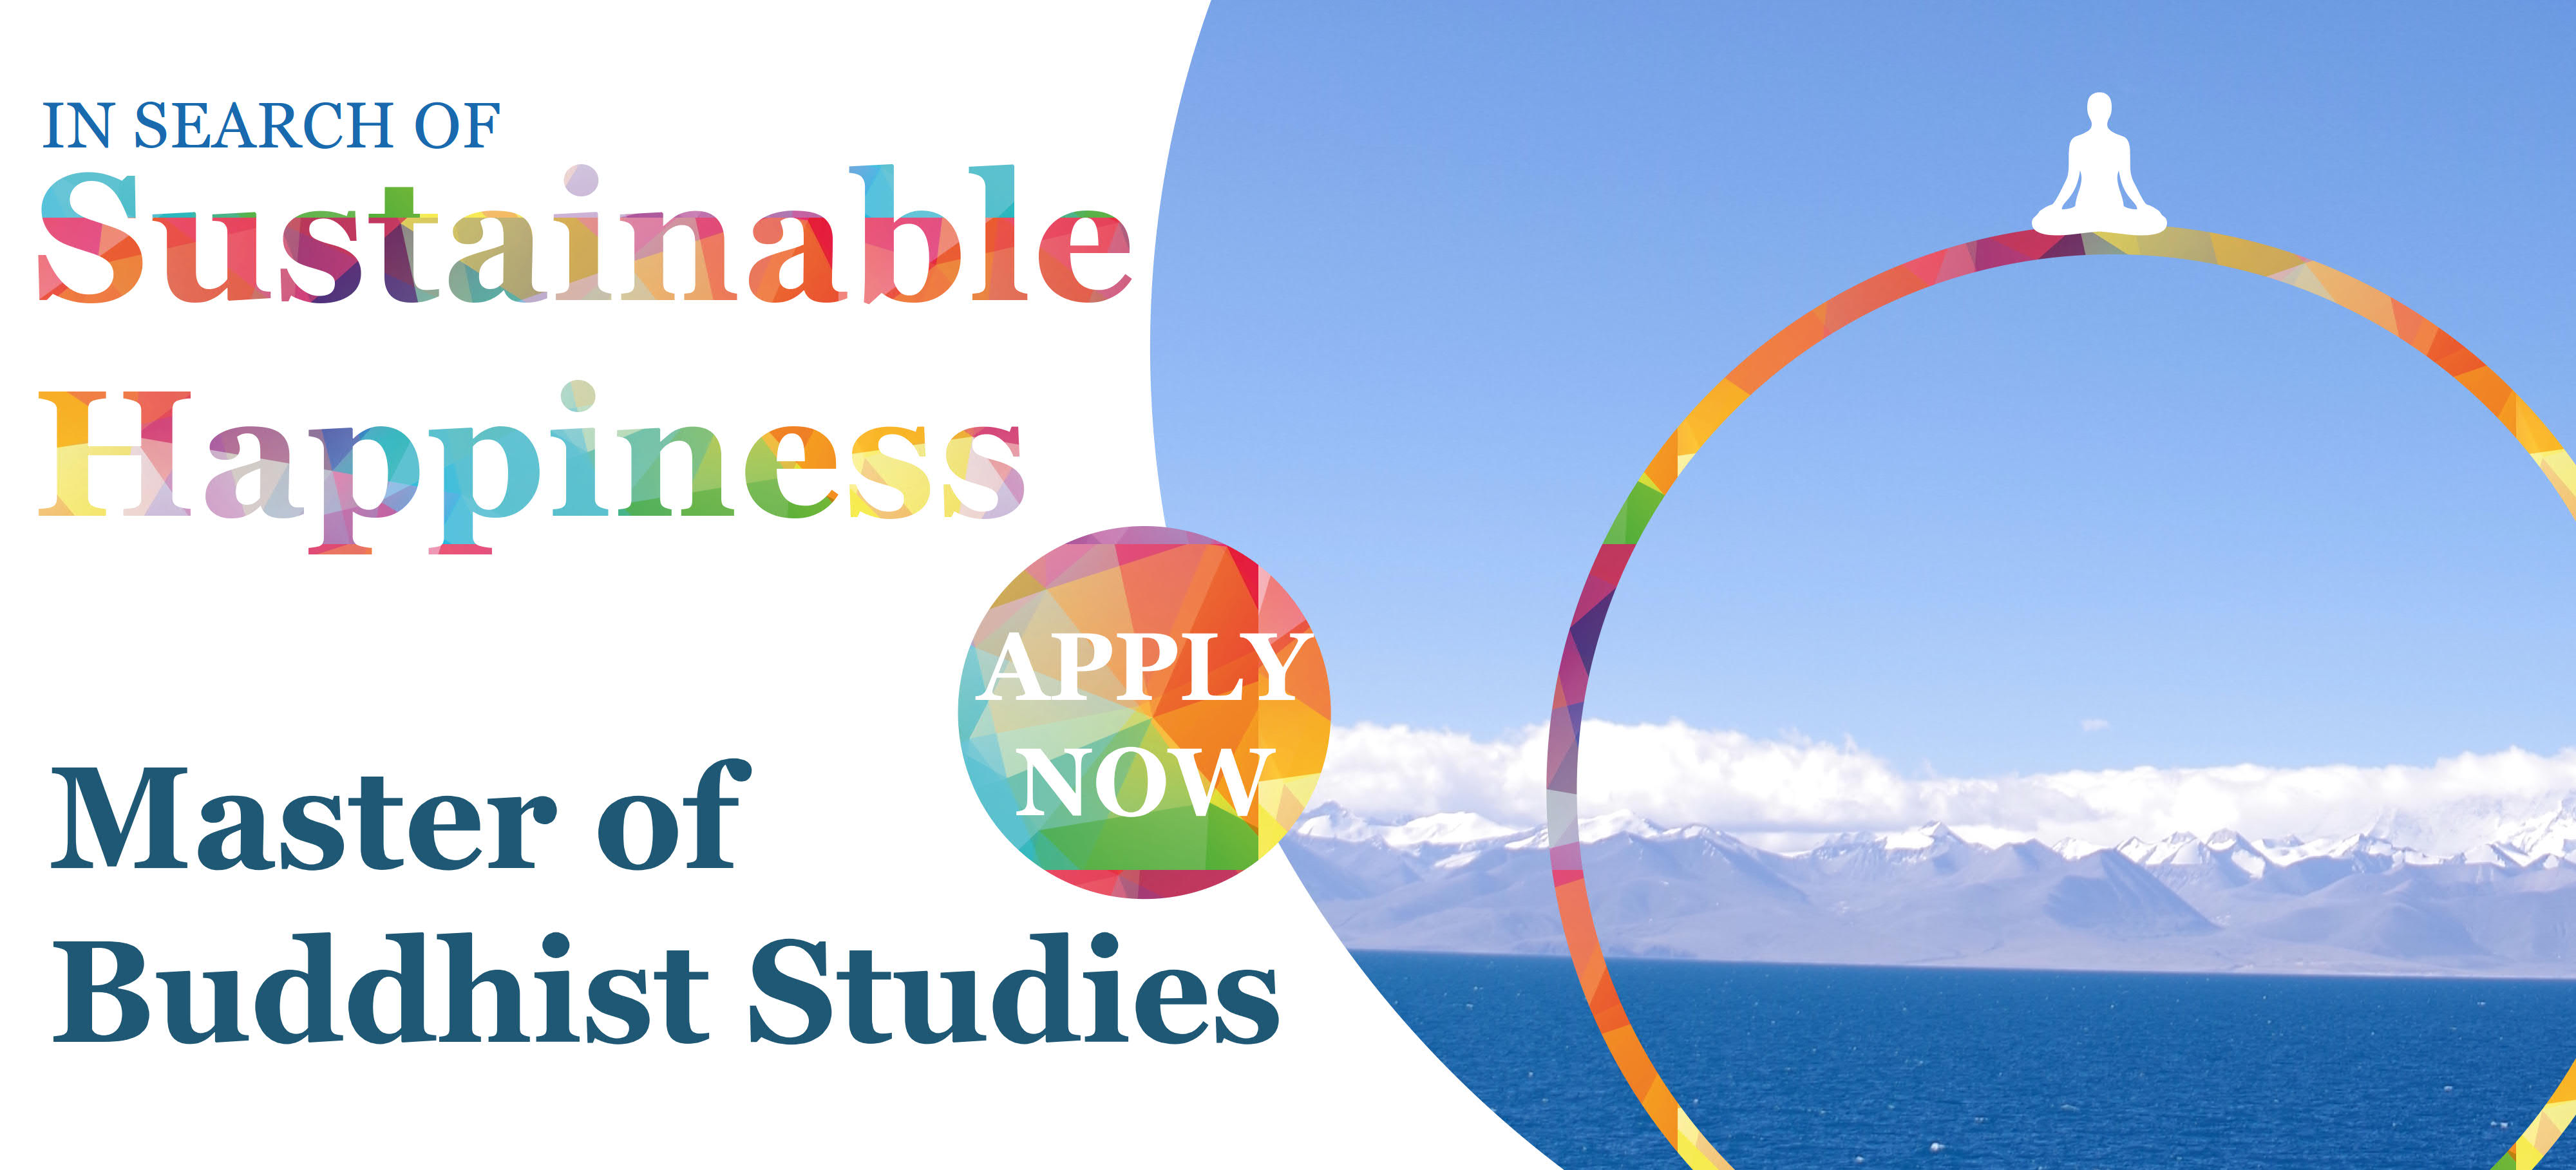 Master of Buddhist Studies In Search of Sustainable Happiness